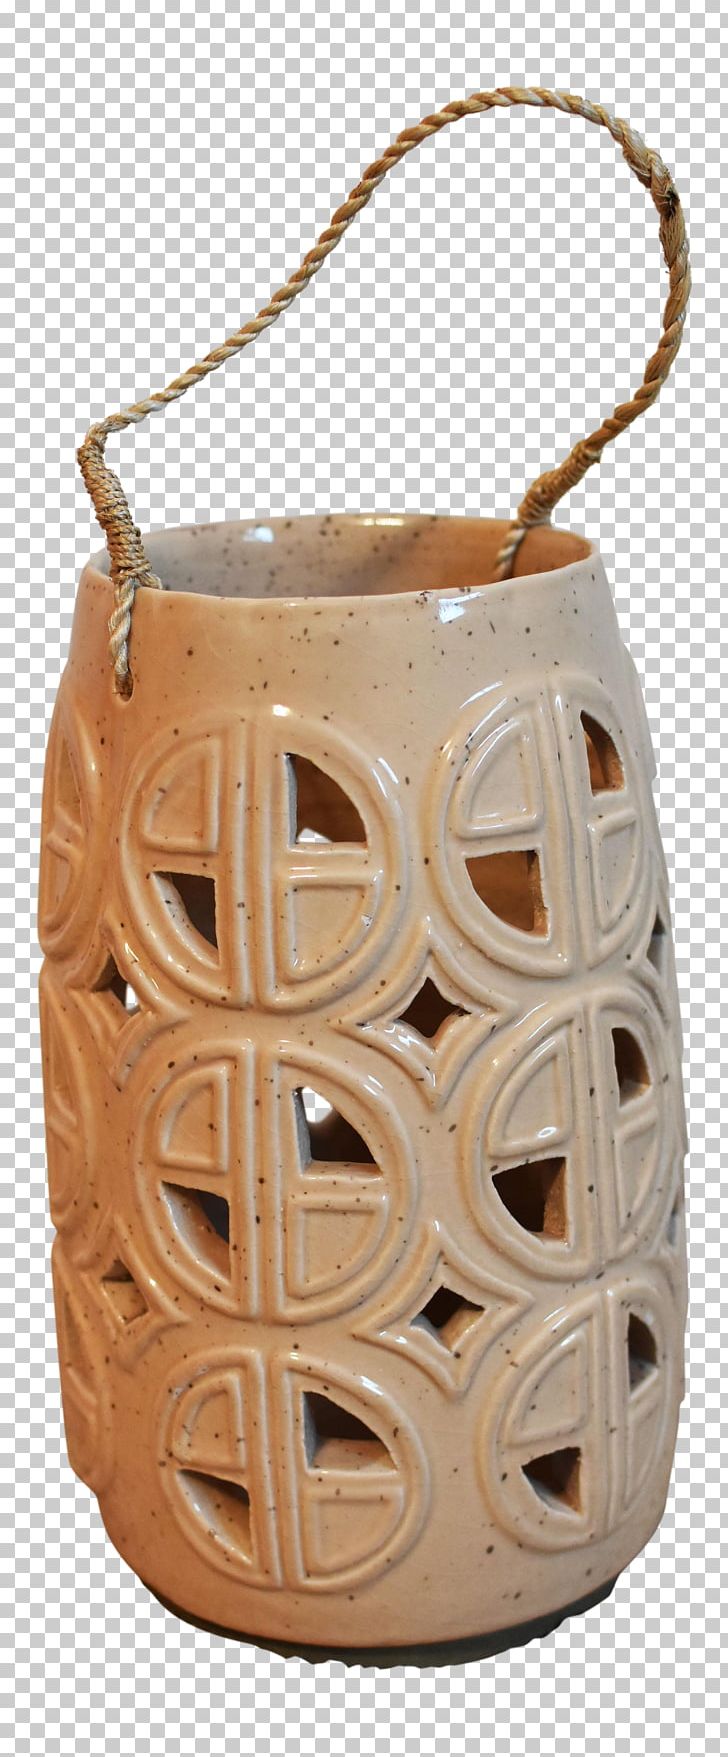 Earthenware Vase Pottery Chairish PNG, Clipart, Art, Beige, Brass, Chairish, Circular Free PNG Download